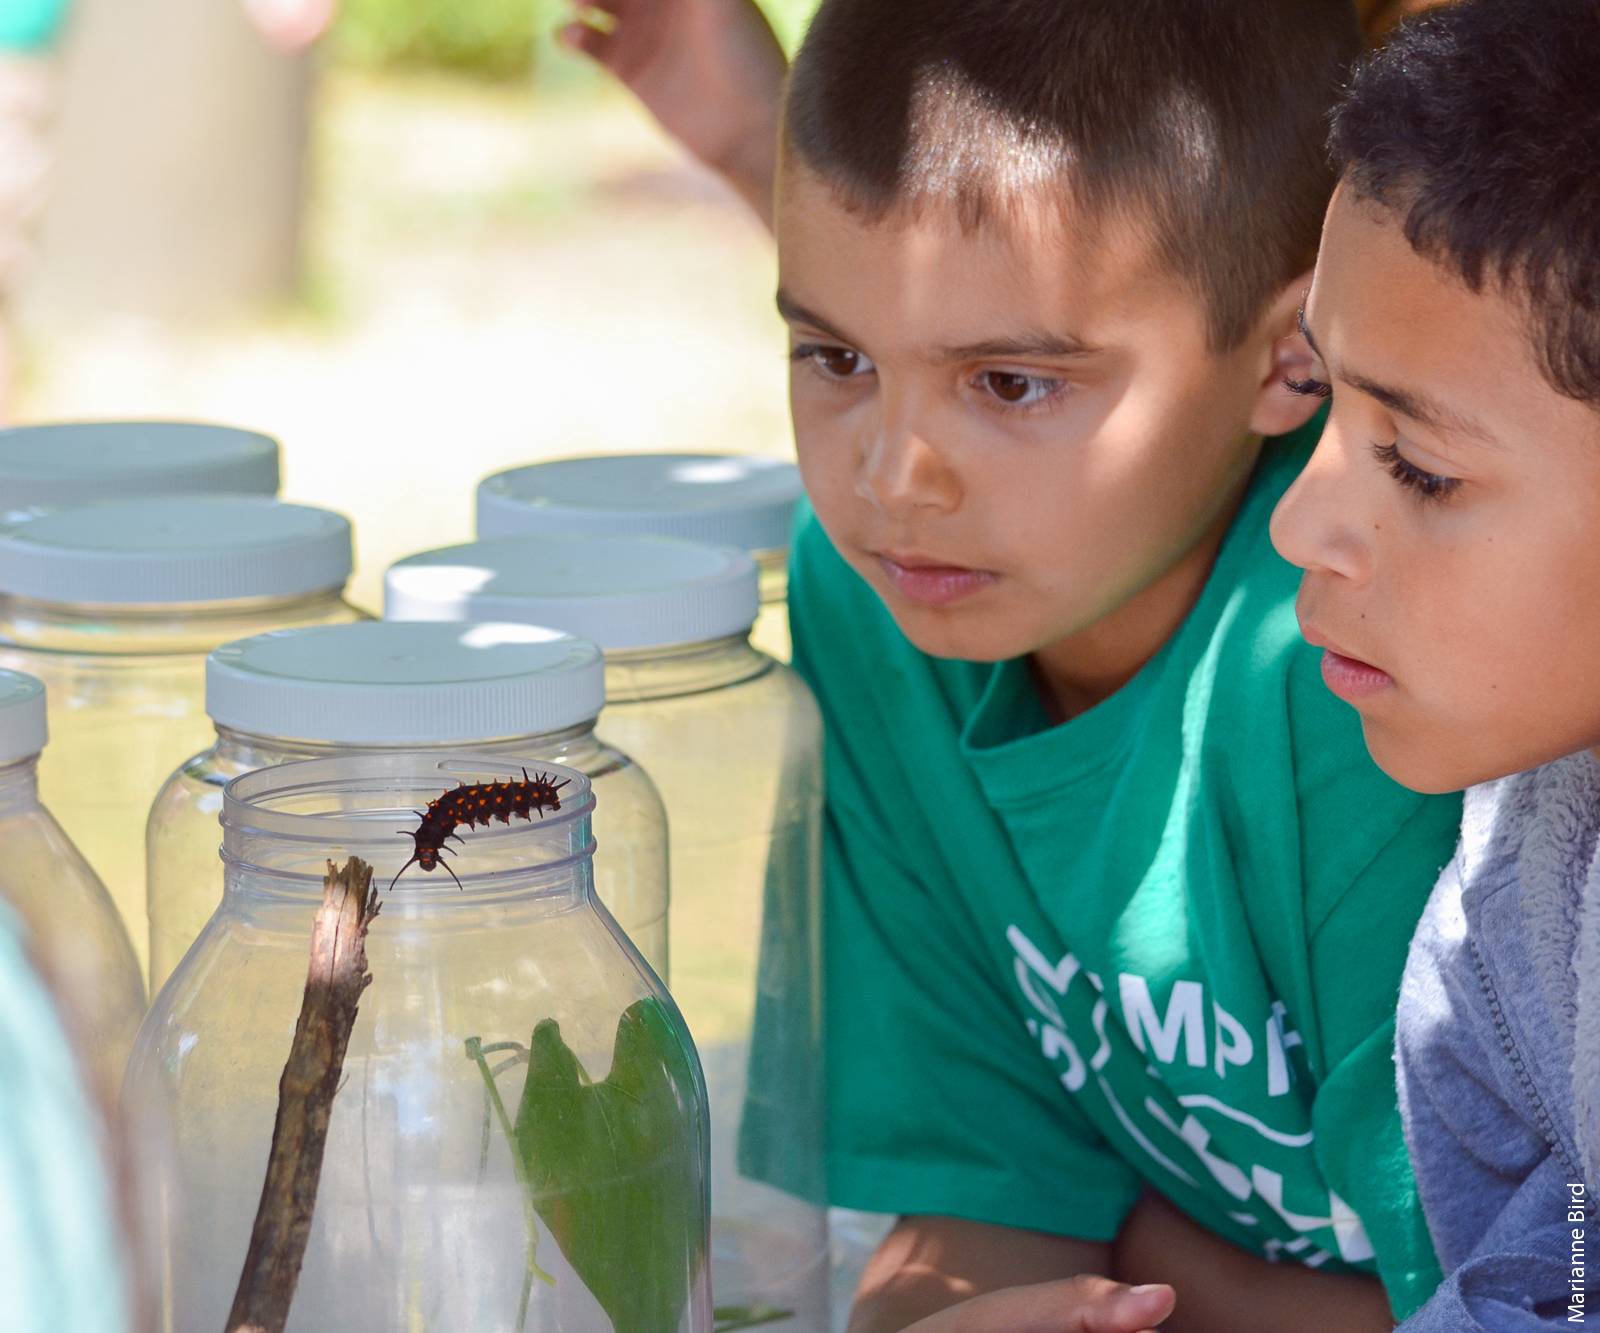 The Sacramento County 4-H Children, Youth and Families at Risk project focuses on science and technology literacy in its afterschool program.